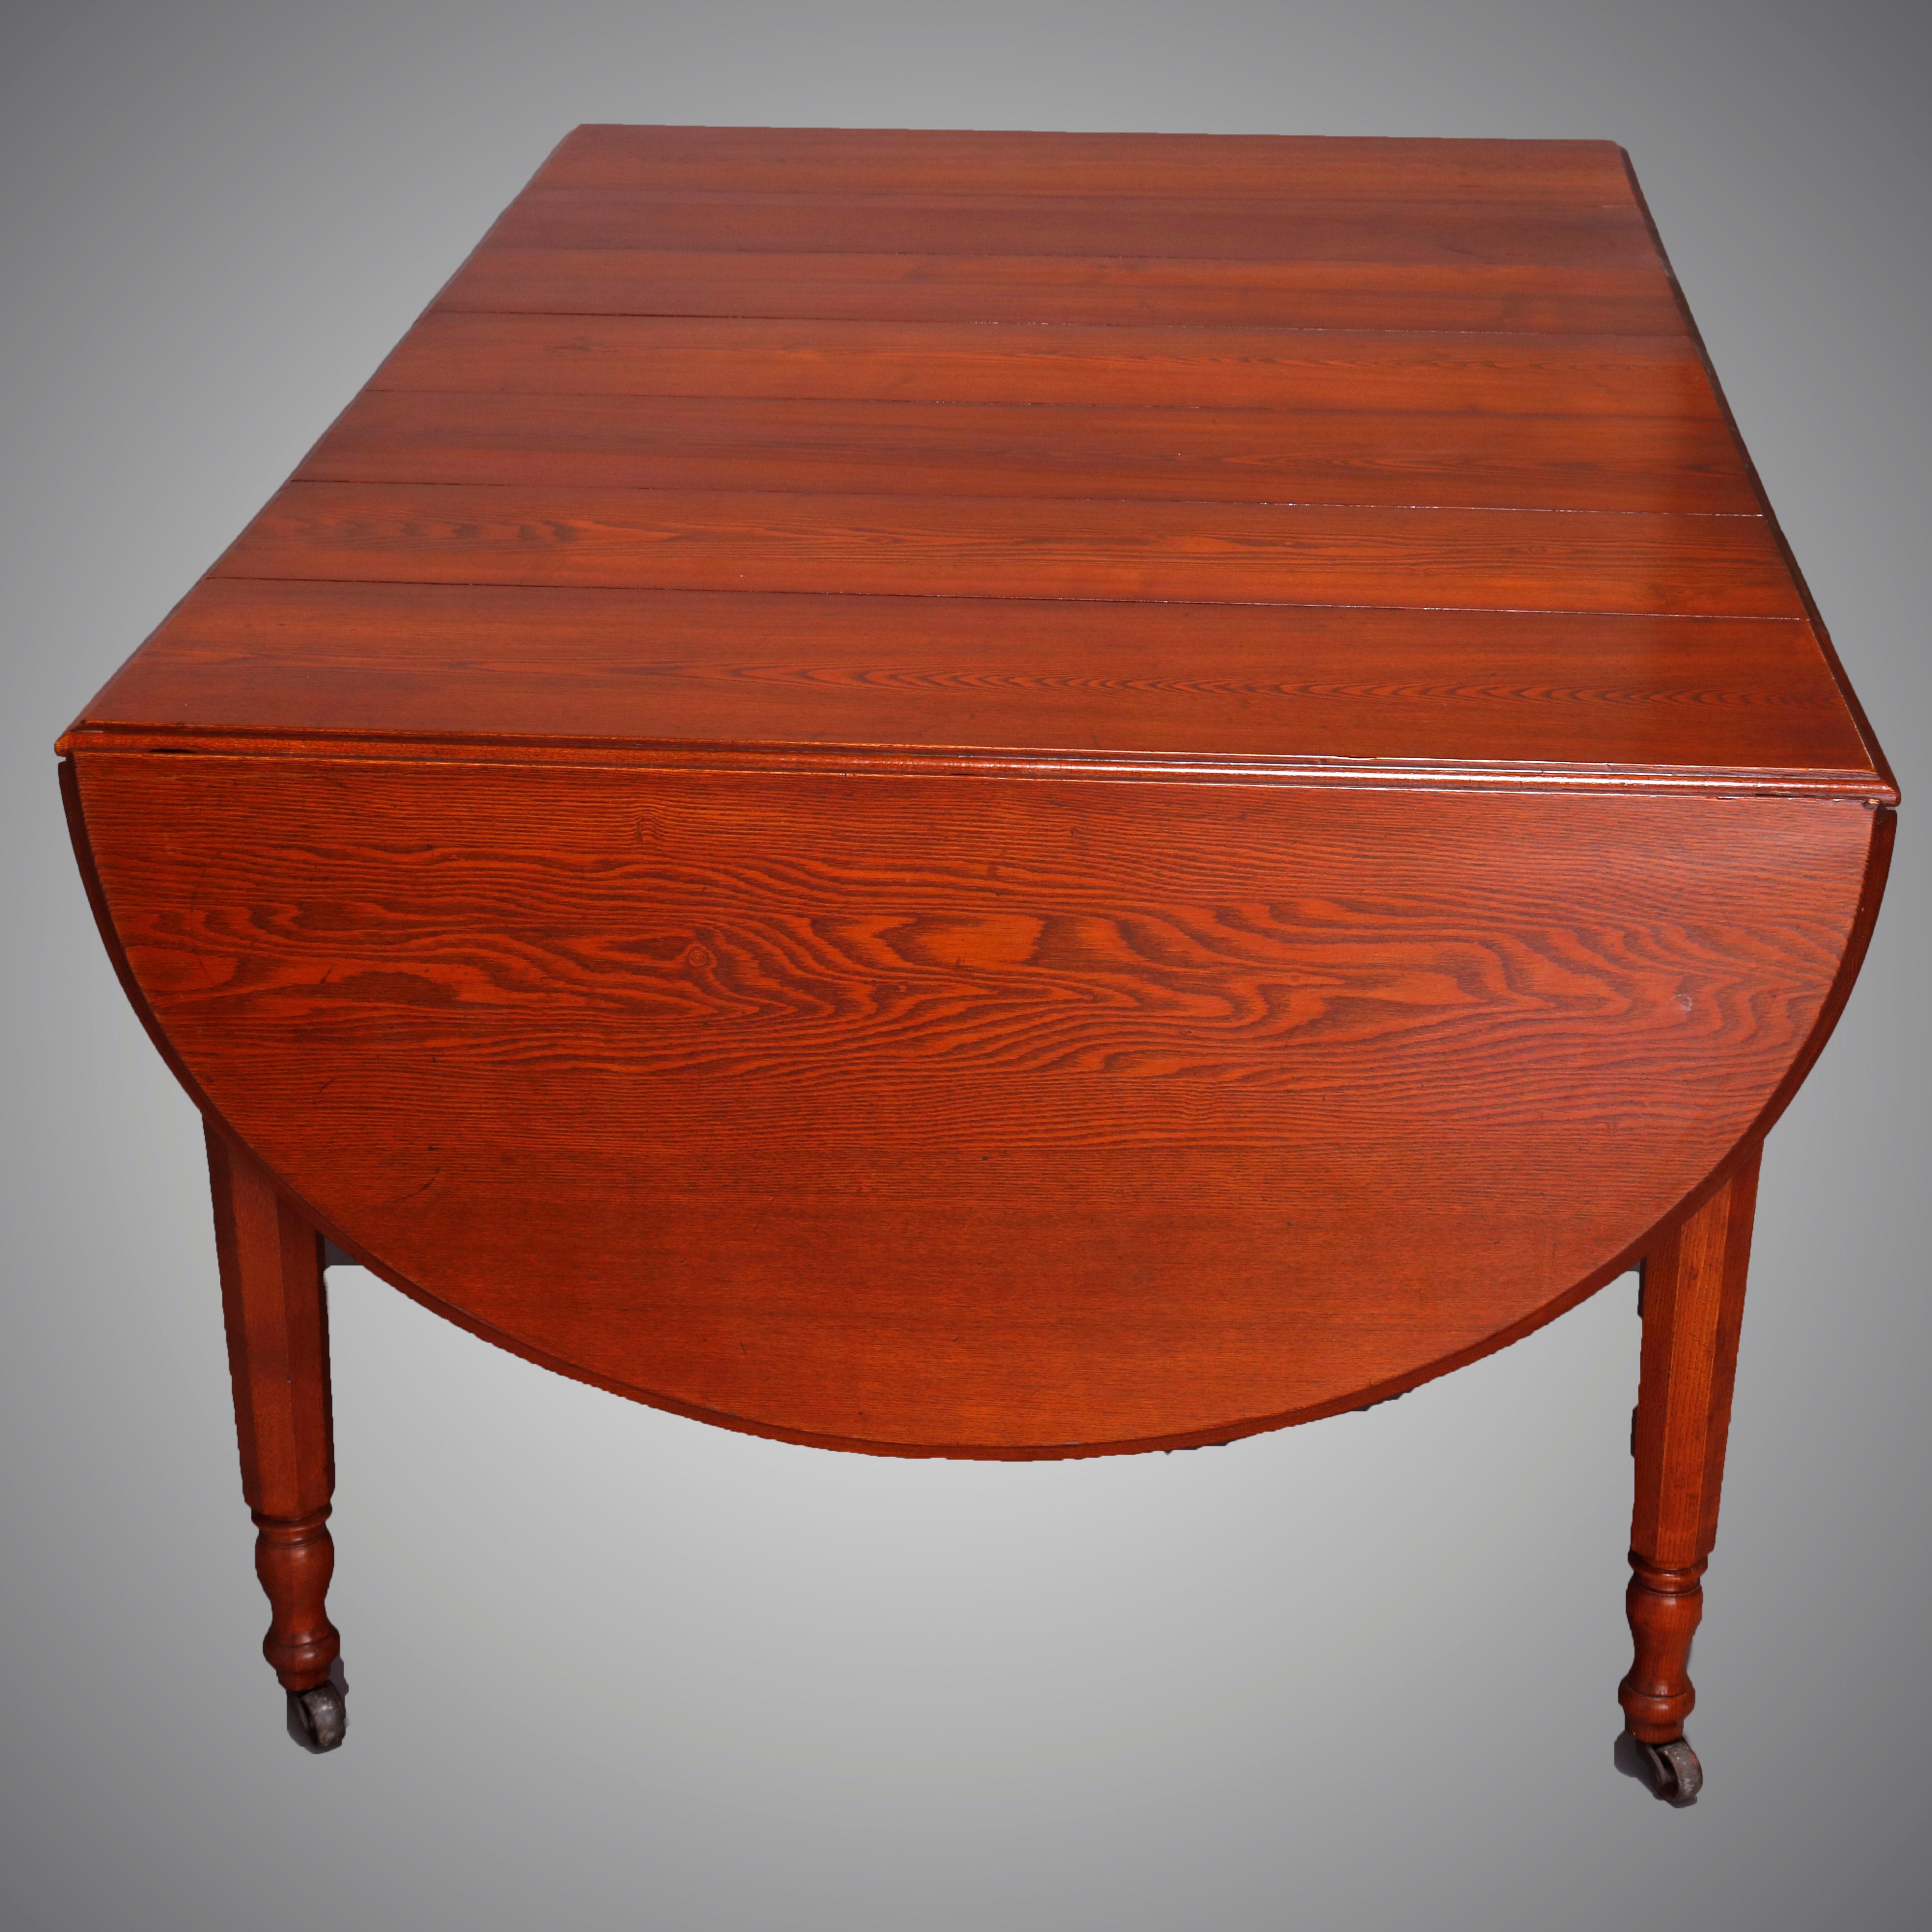 An antique Sheraton drop leaf banquet table offers chestnut construction with round top raised on turned legs with casters and expends to accept five leaves, circa 1910

***DELIVERY NOTICE – Due to COVID-19 we have employed LIMITED-TO-NO-CONTACT